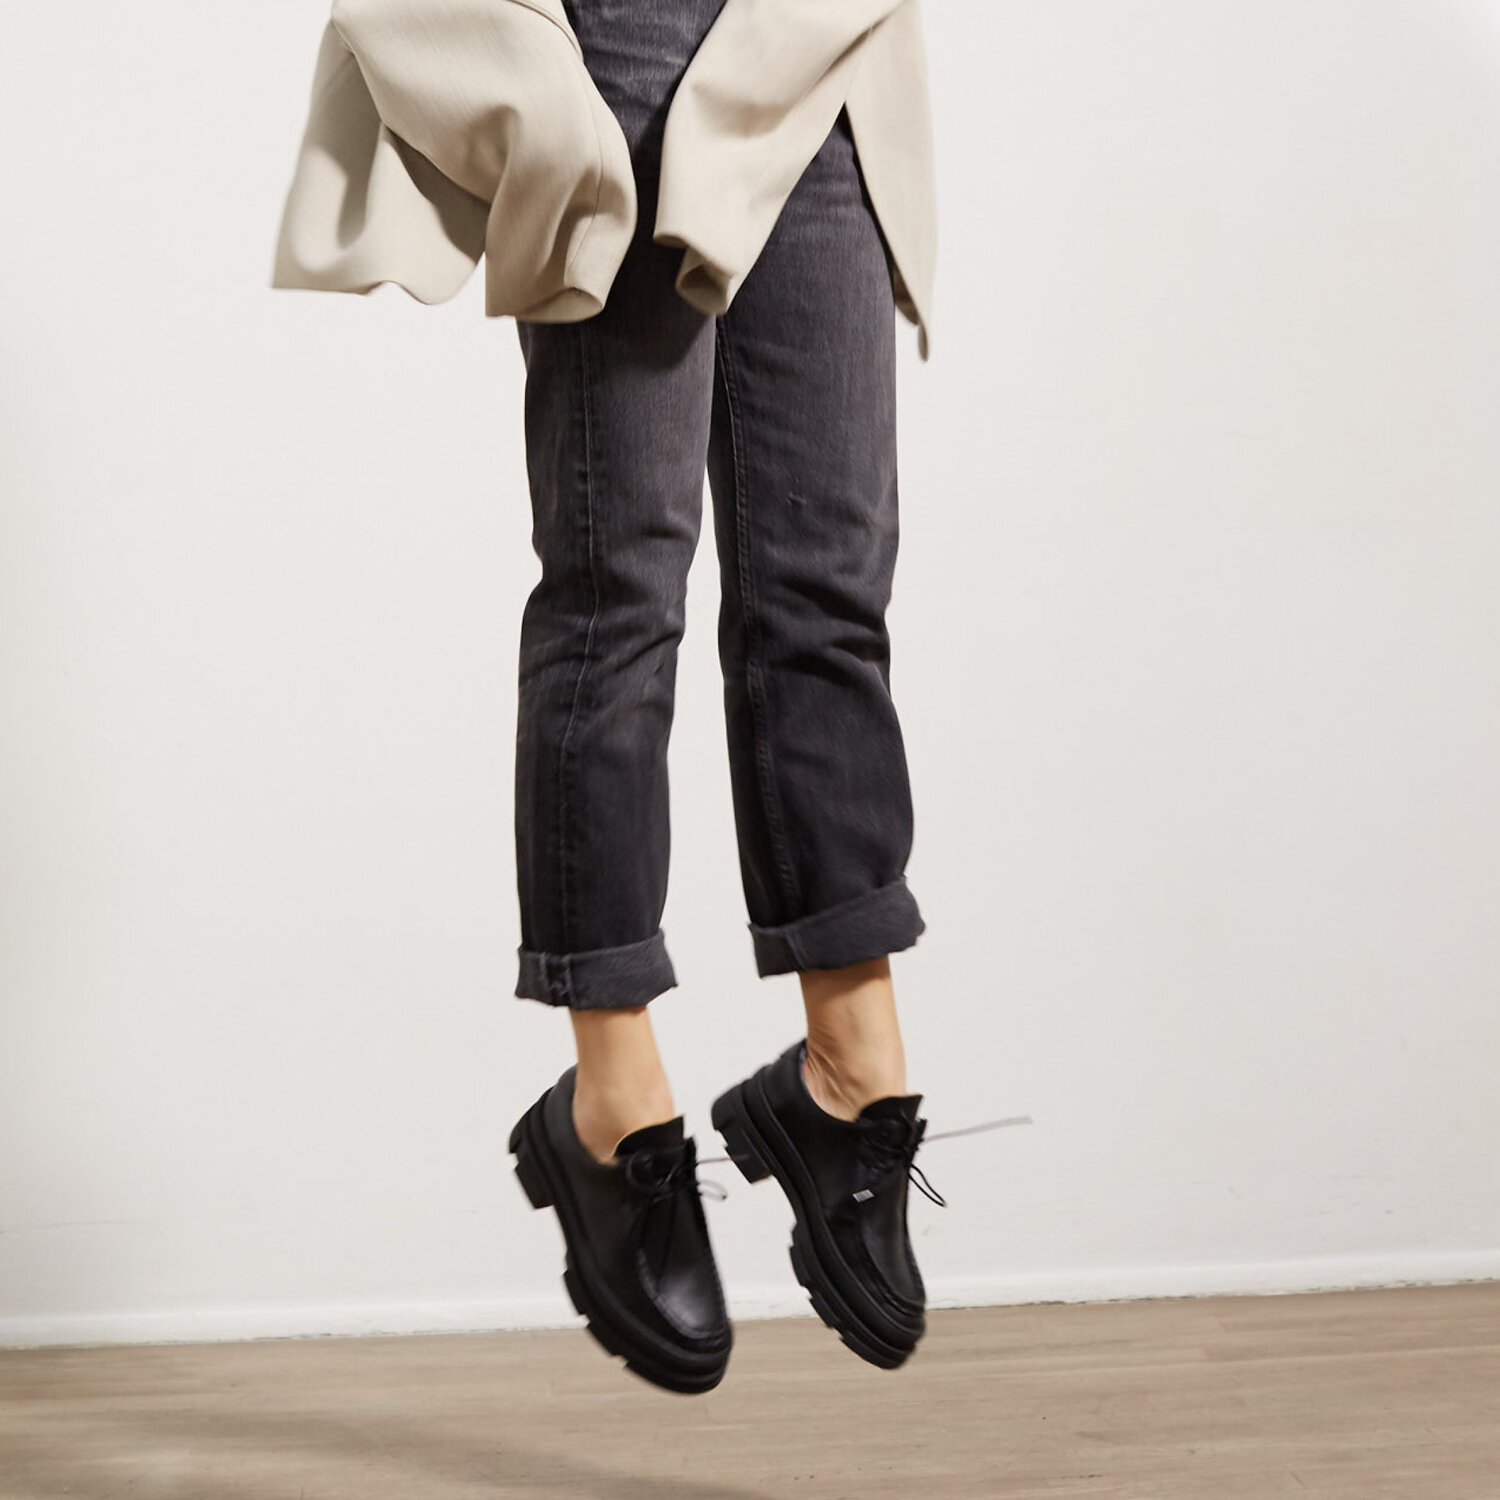 JUMP RIGHT IN OPEN BACK LOAFER IN BLACK